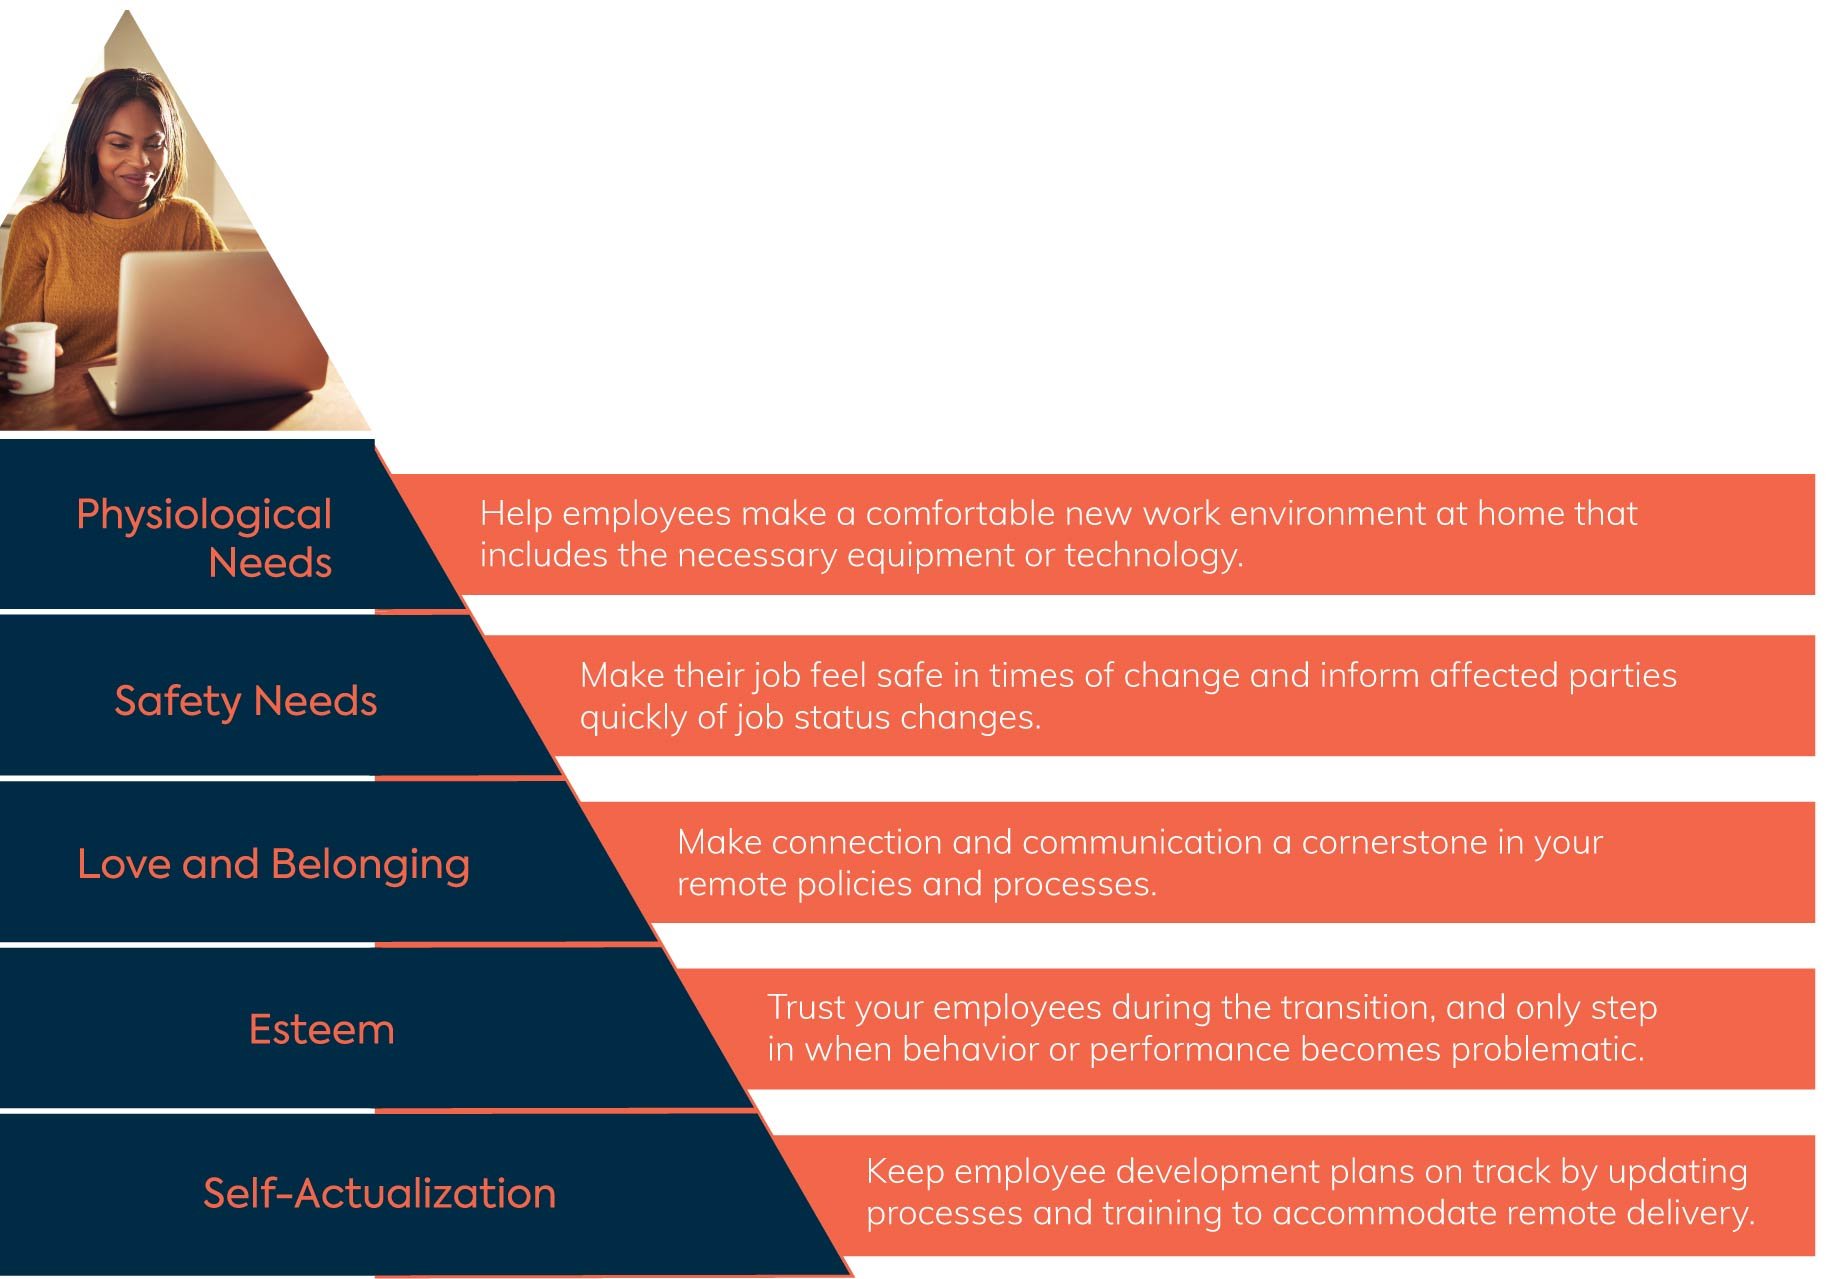 Feed Your Employees’ Maslow’s Hierarchy of Needs